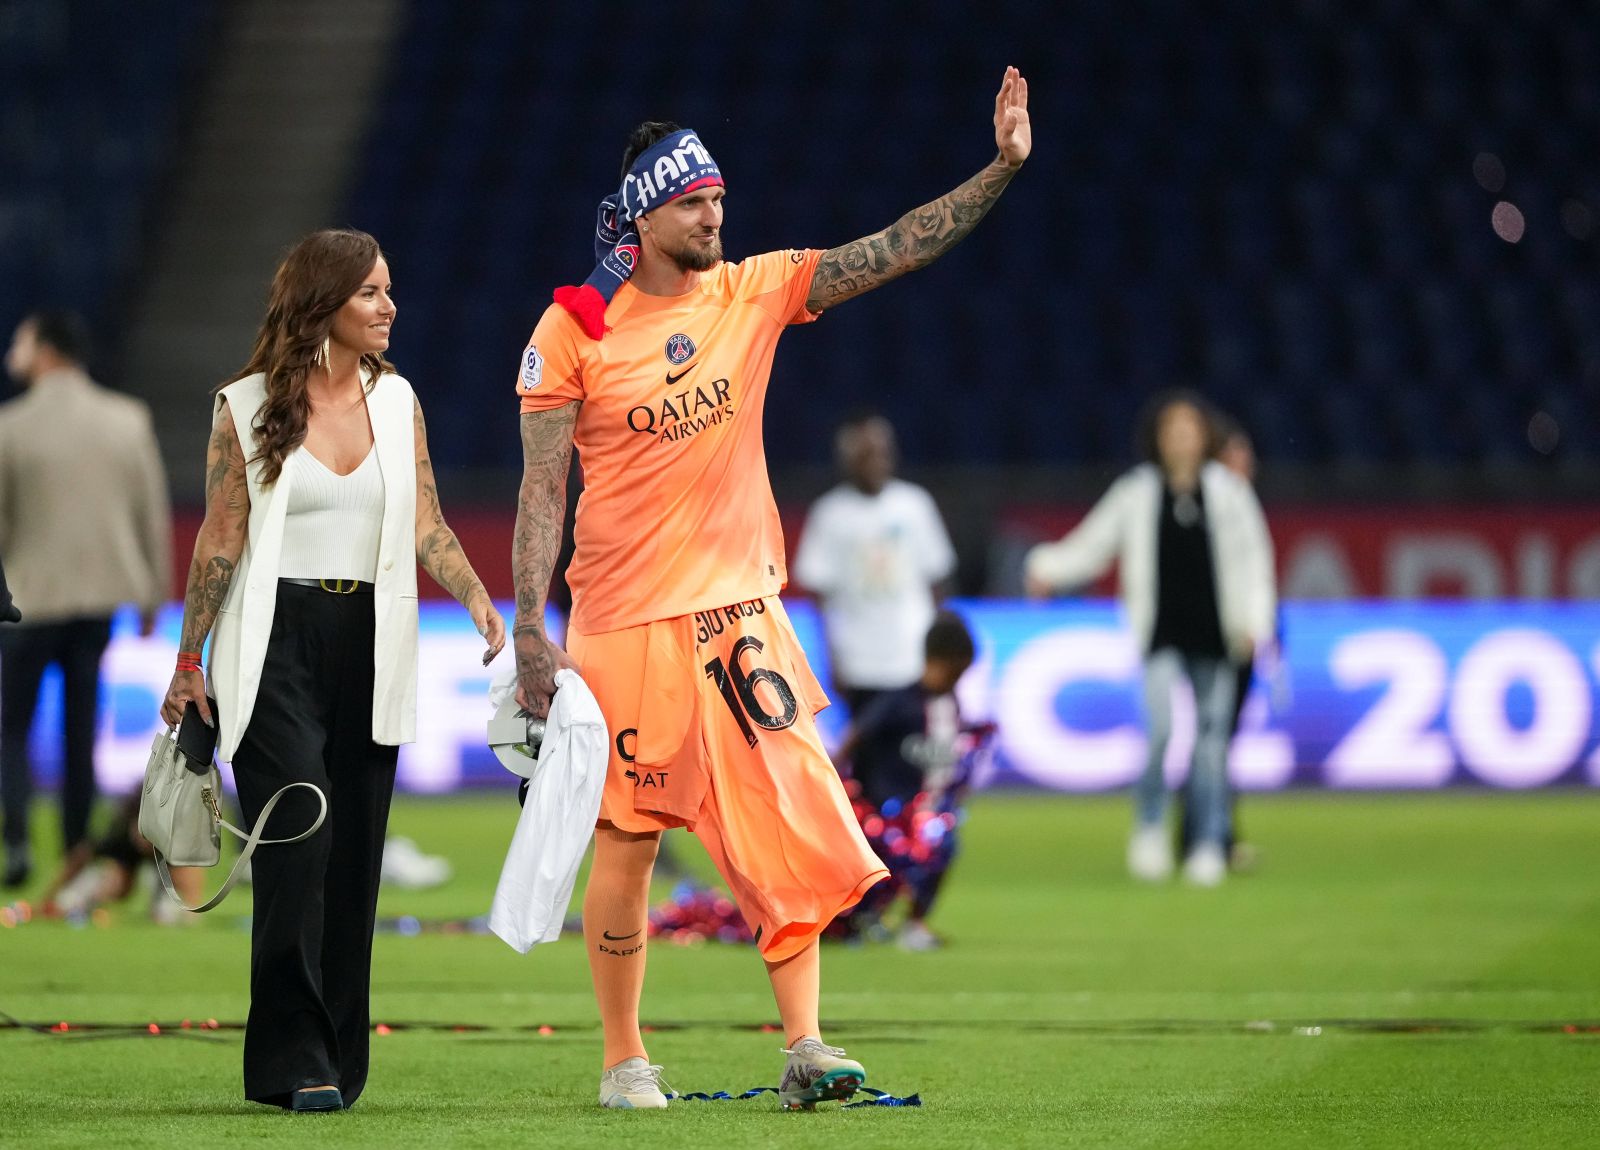 Goalkeeper Alexandre Letellier of PSG with wife Chloe Letellier post match during the Ligue 1 match between Paris Saint Germain and Clermont Foot at Parc des Princes, Paris, France on 3 June 2023. Copyright: xAndyxRowlandx PMI-5577-0057